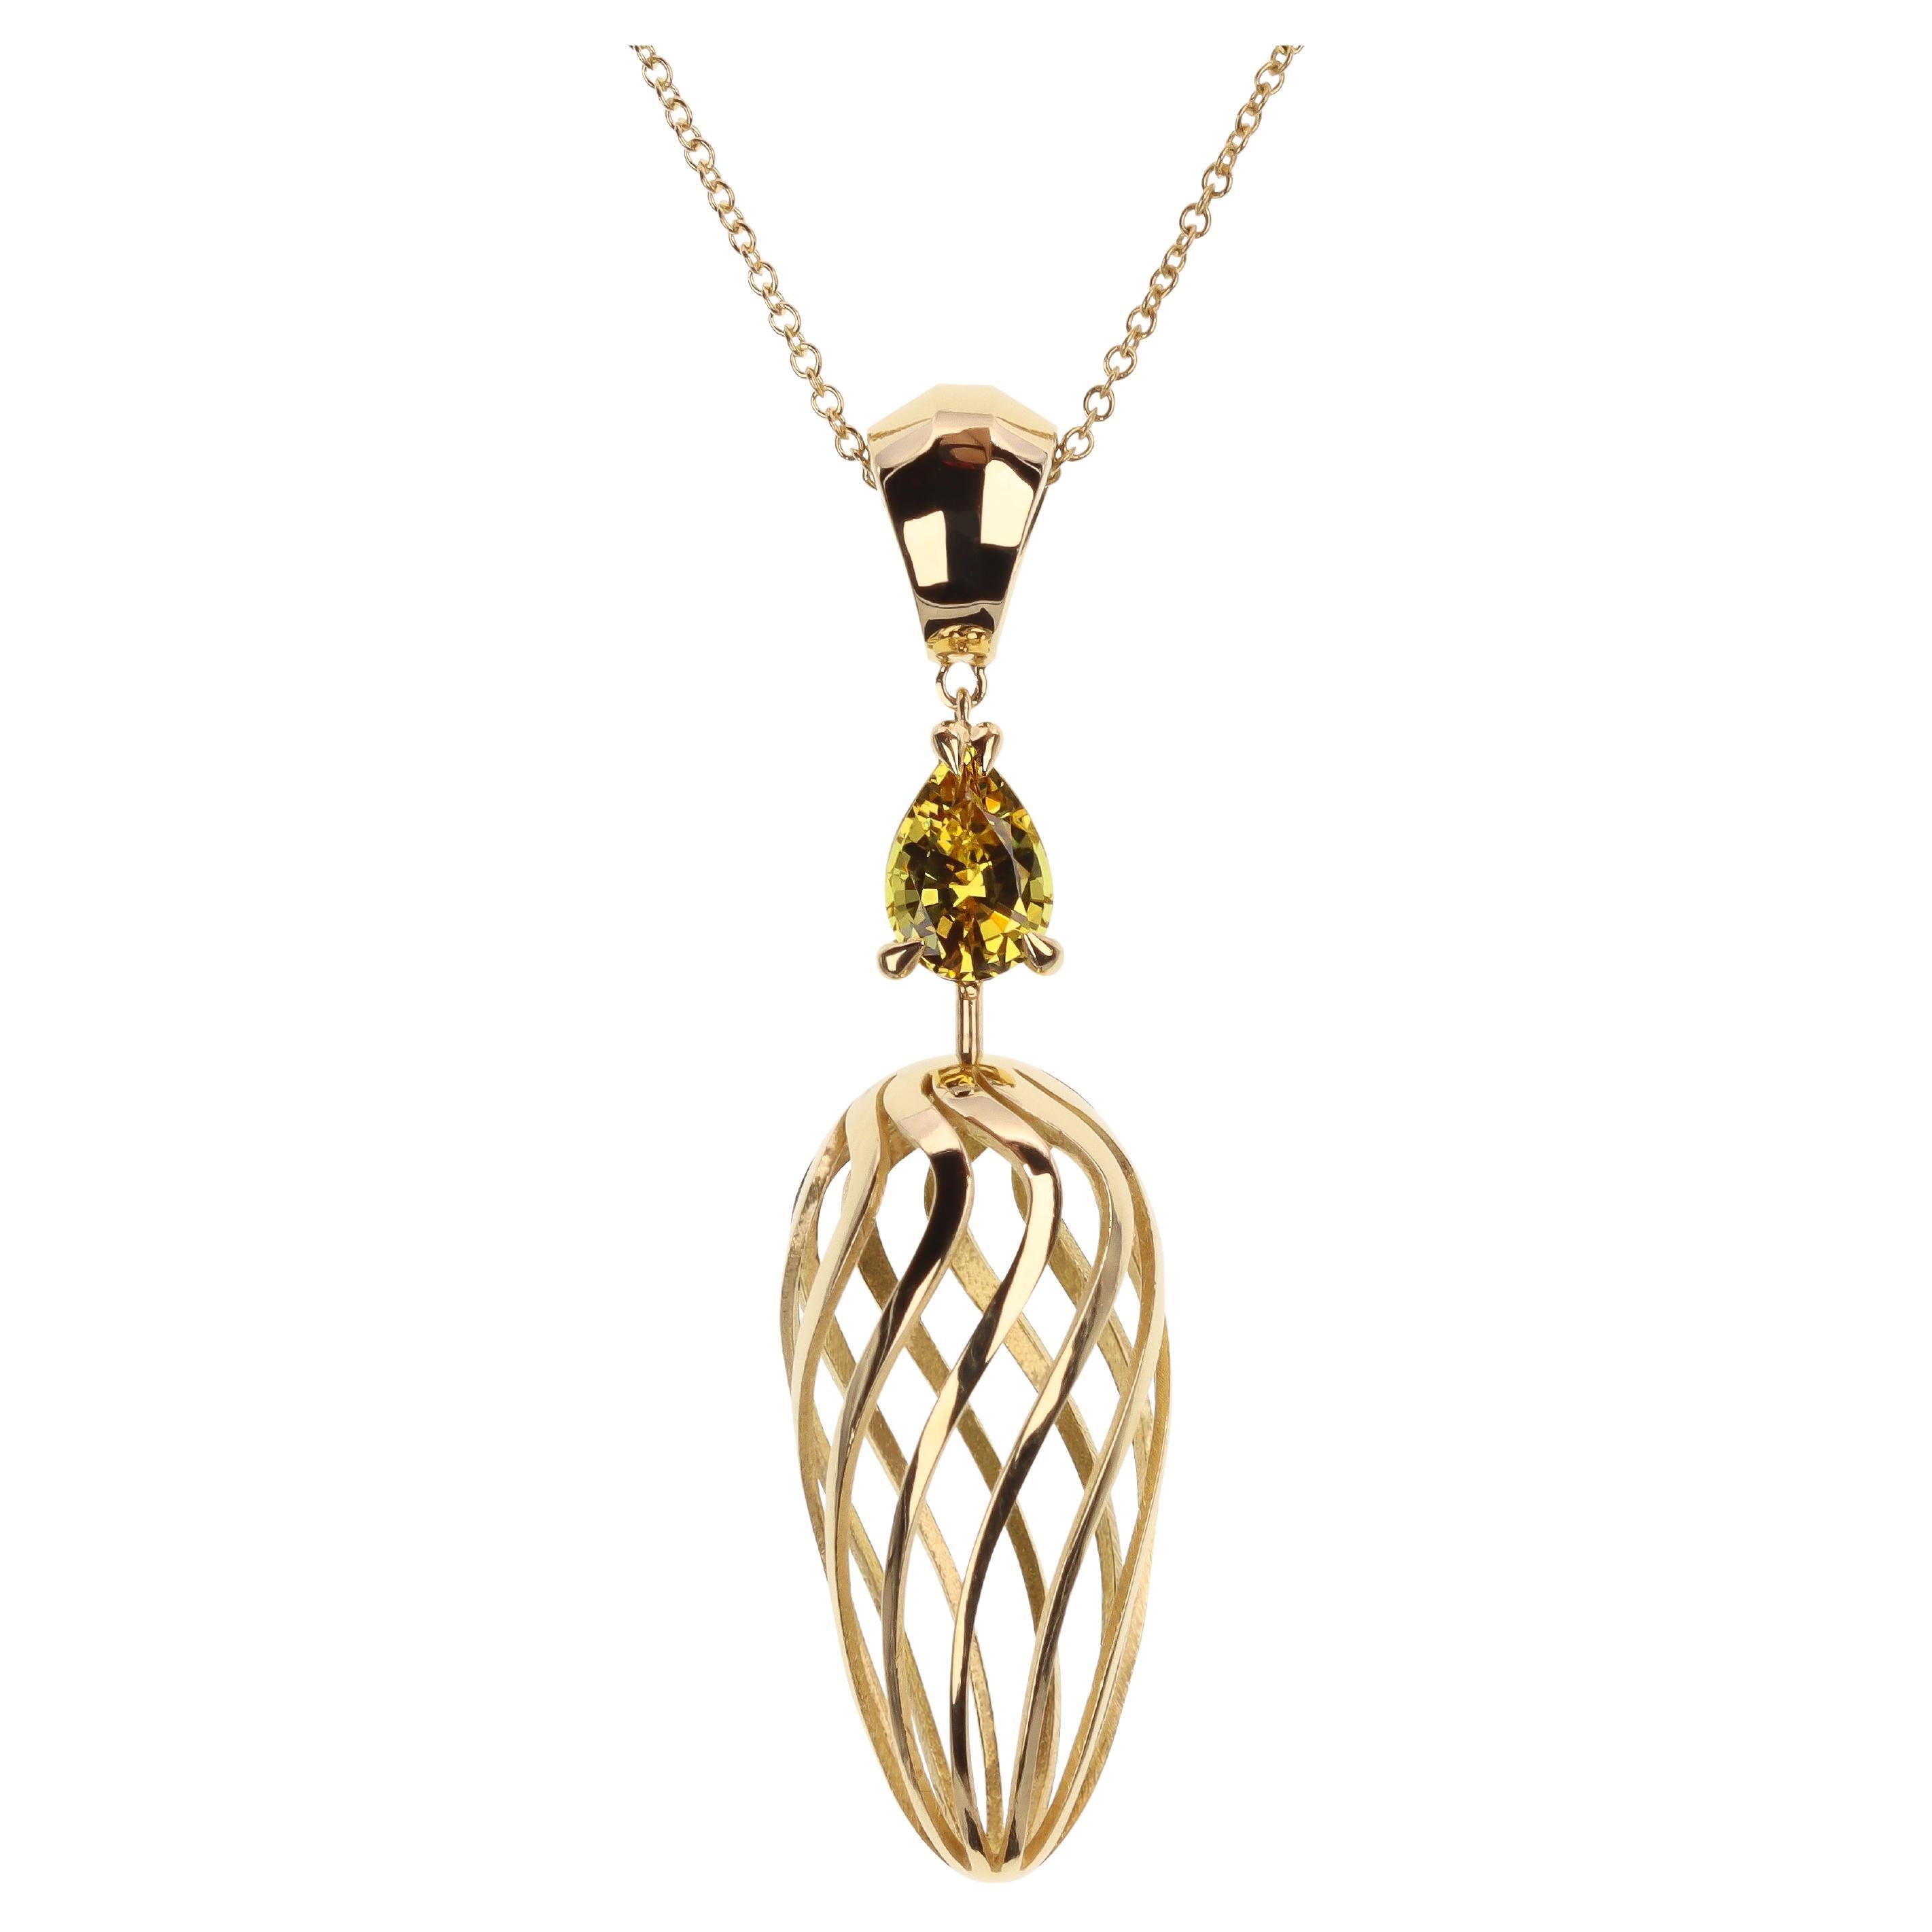 Aventina-Spencer, "Trellis", 1.25 Ct Vivid Yellow Sapphire and 18k Gold Pendant For Sale